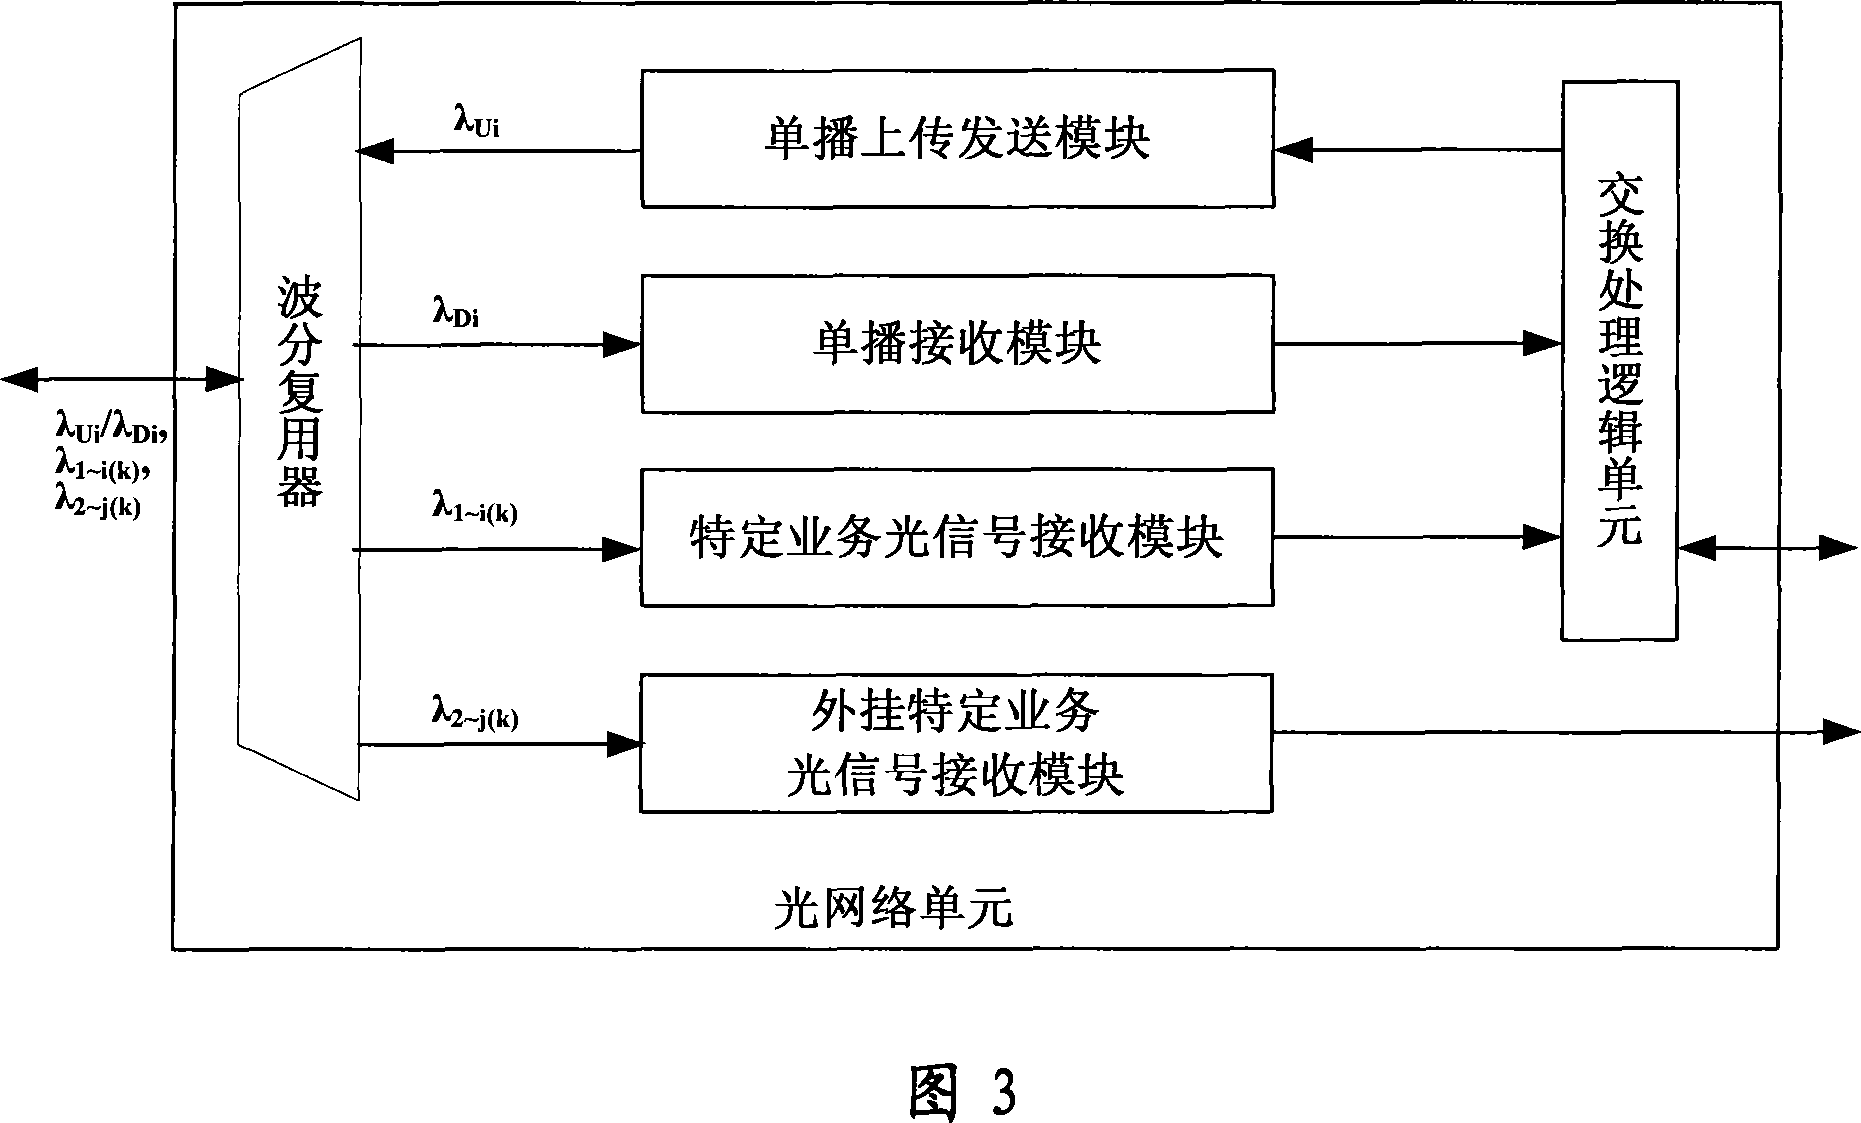 Wave time division mixed multiplexing passive optical network system